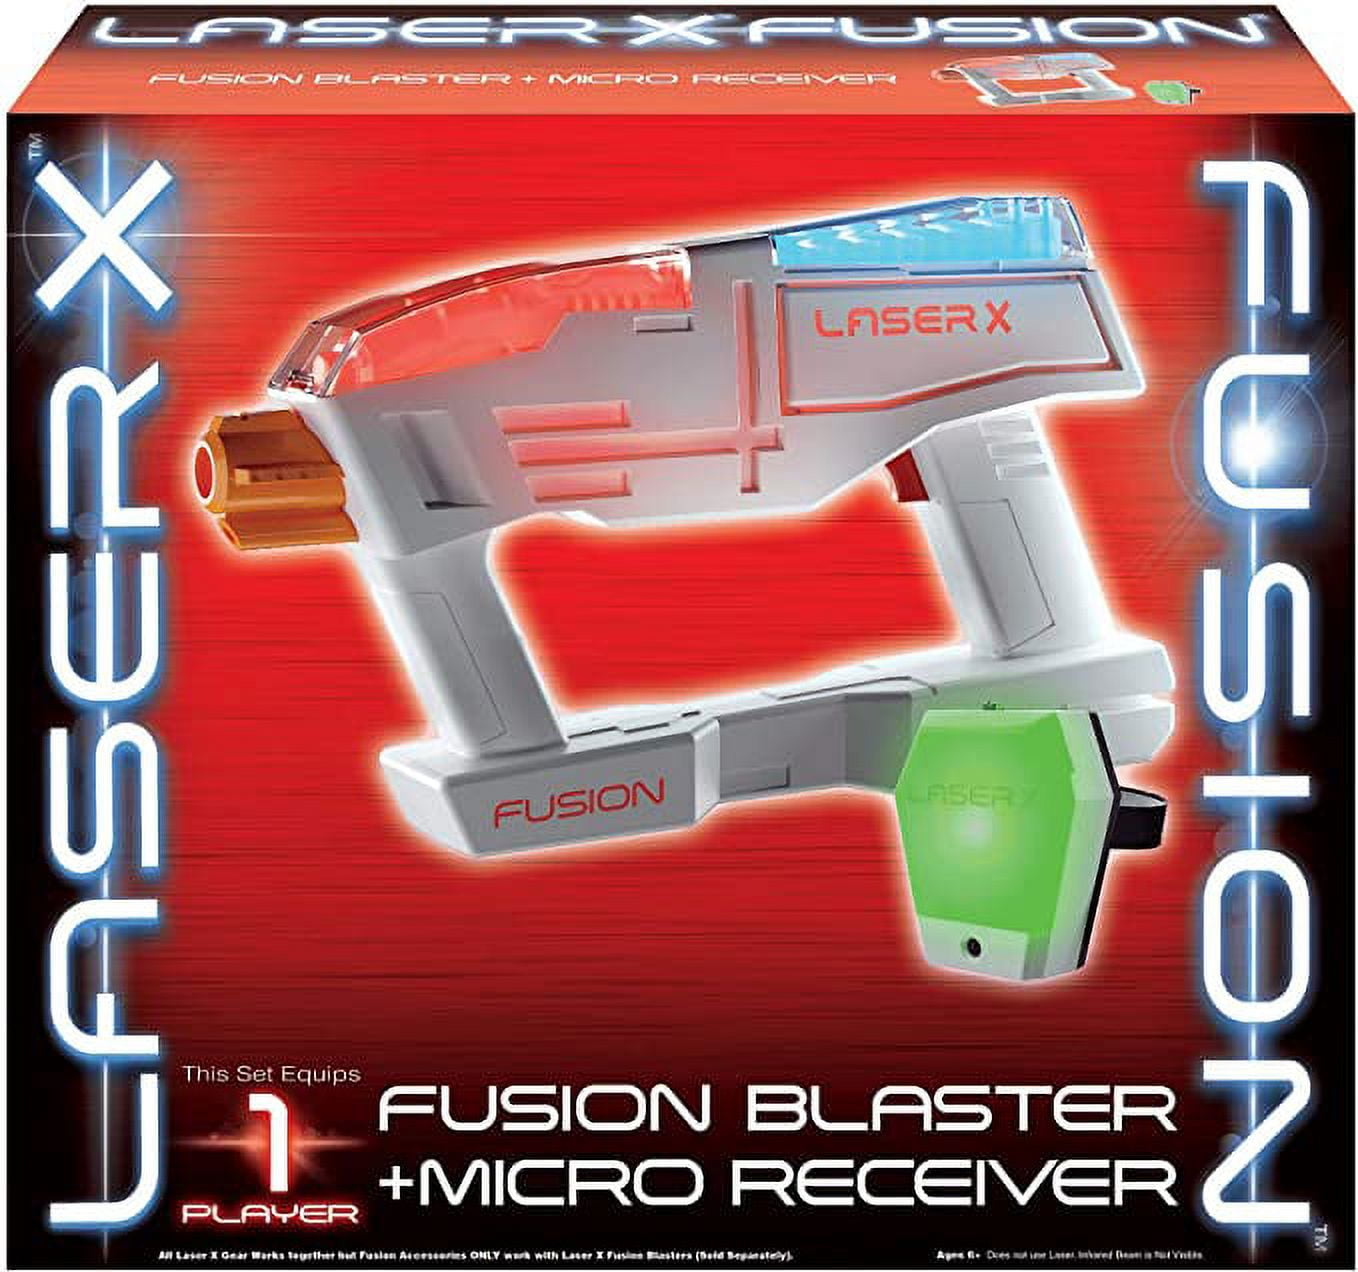 Pack Fun Wide x Feet Home Laser Outdoor for Micro One 20 - 2 - or Toy - Blaster Blaster X + Each Fusion Pck Entertainment Range 30 Receiver, at Player